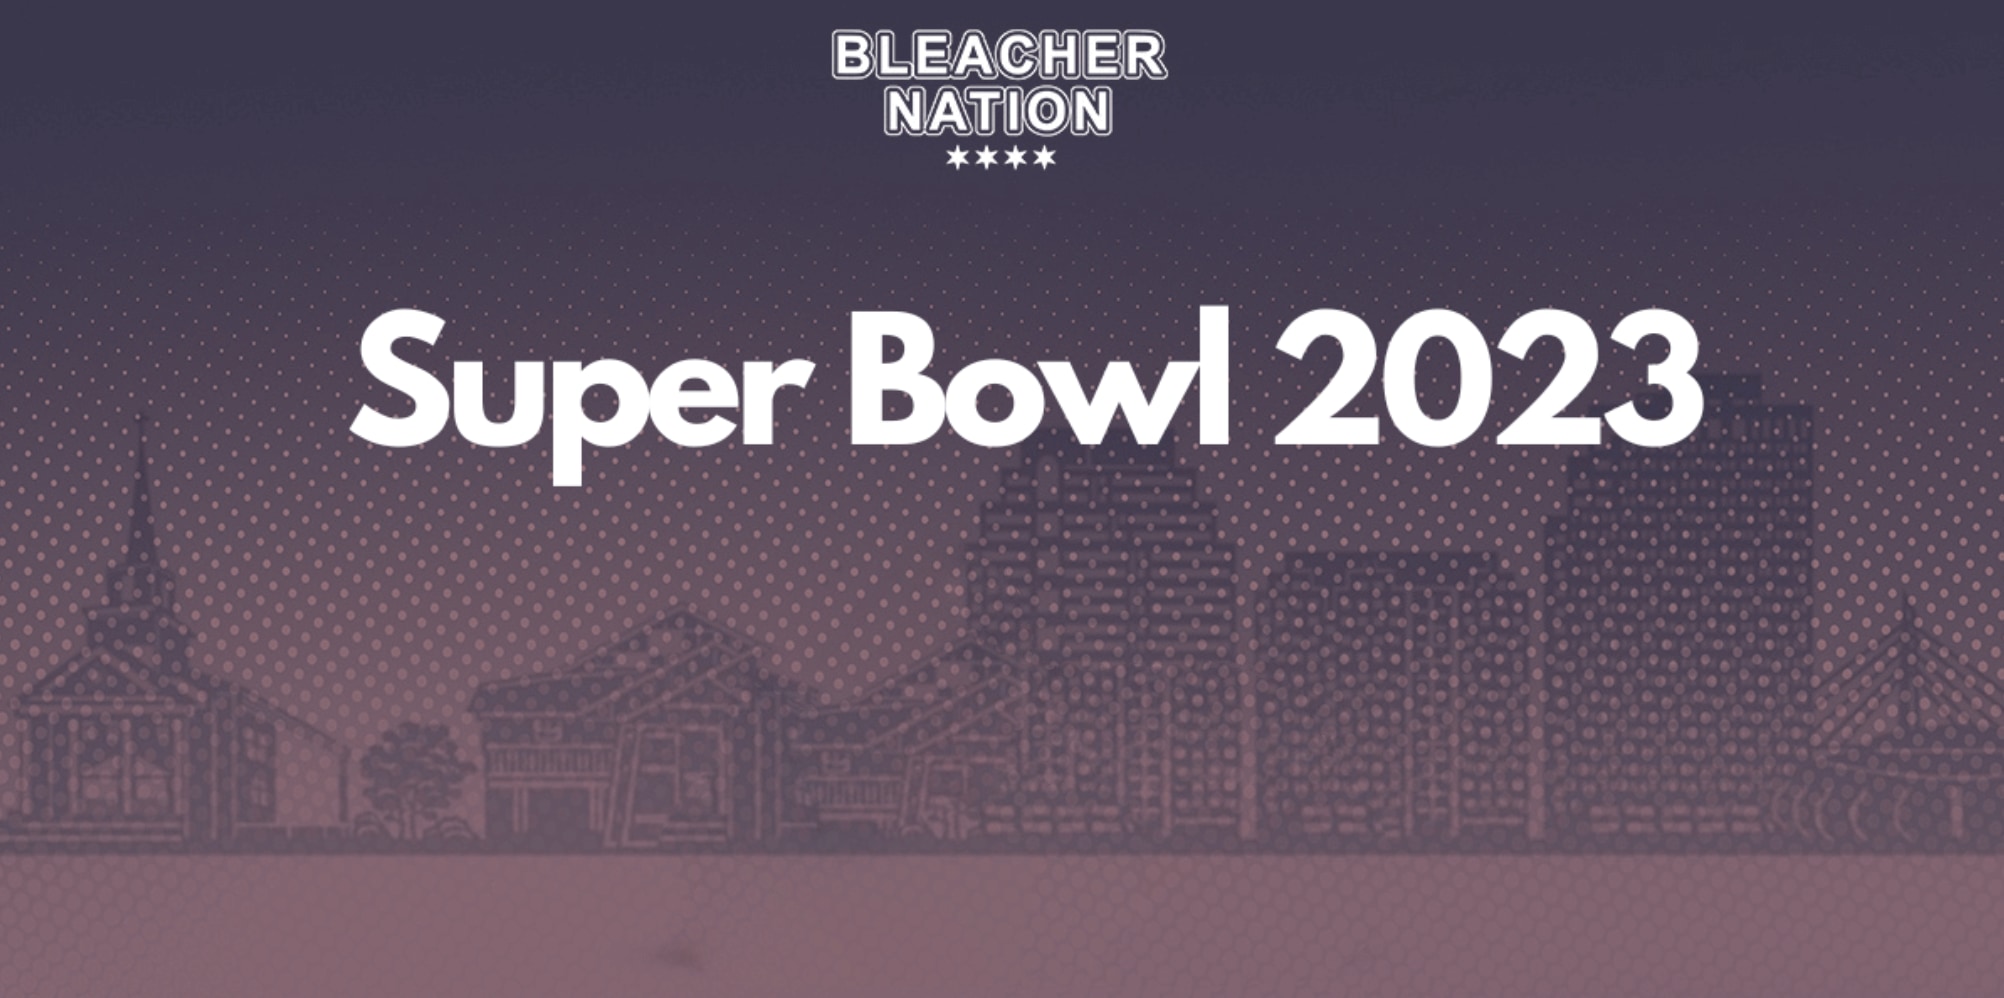 Super Bowl 2023: Date, Kick-off Time, and How to Watch Live